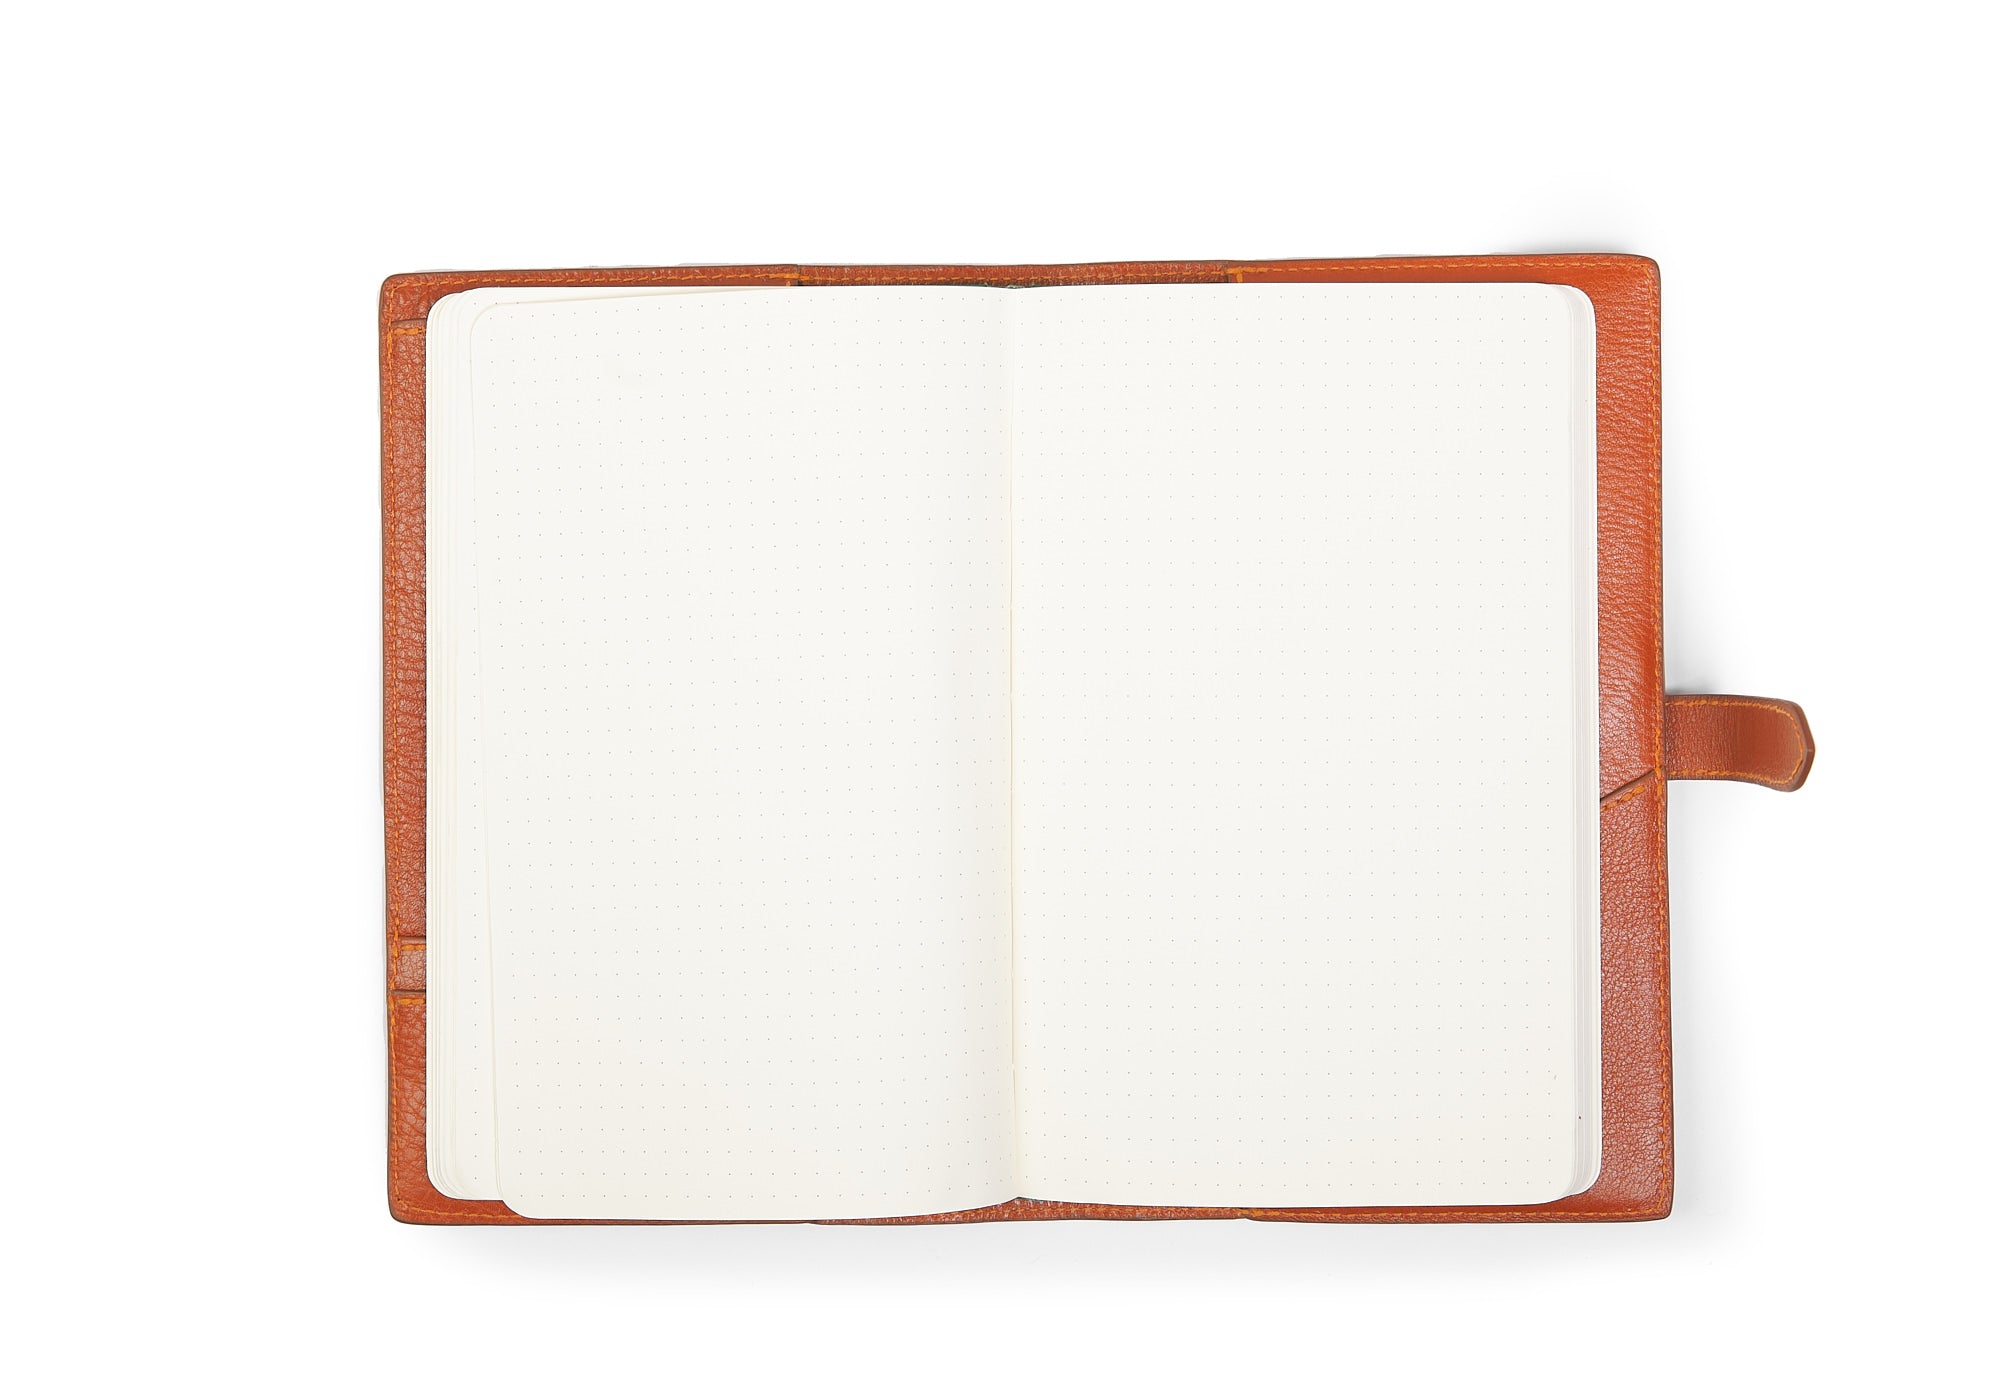 Pages of Leather Travel Journal Orange